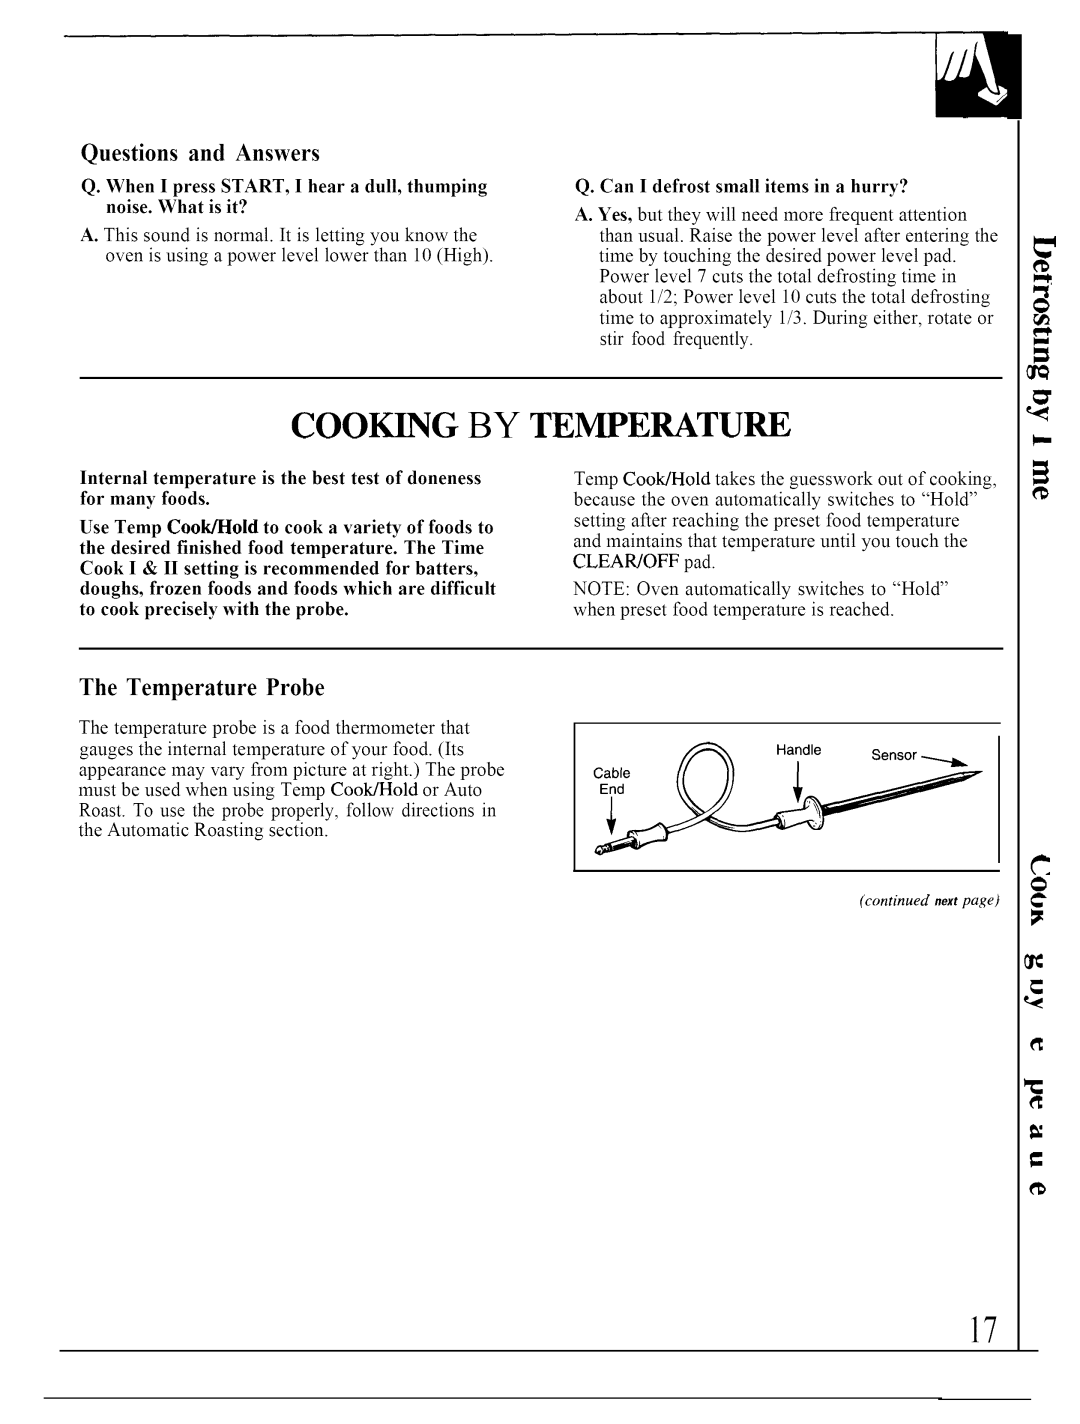 GE JVM140K operating instructions Cooking By Temperature, Questions and Answers, Q. Can I defrost small items in a hurry? 